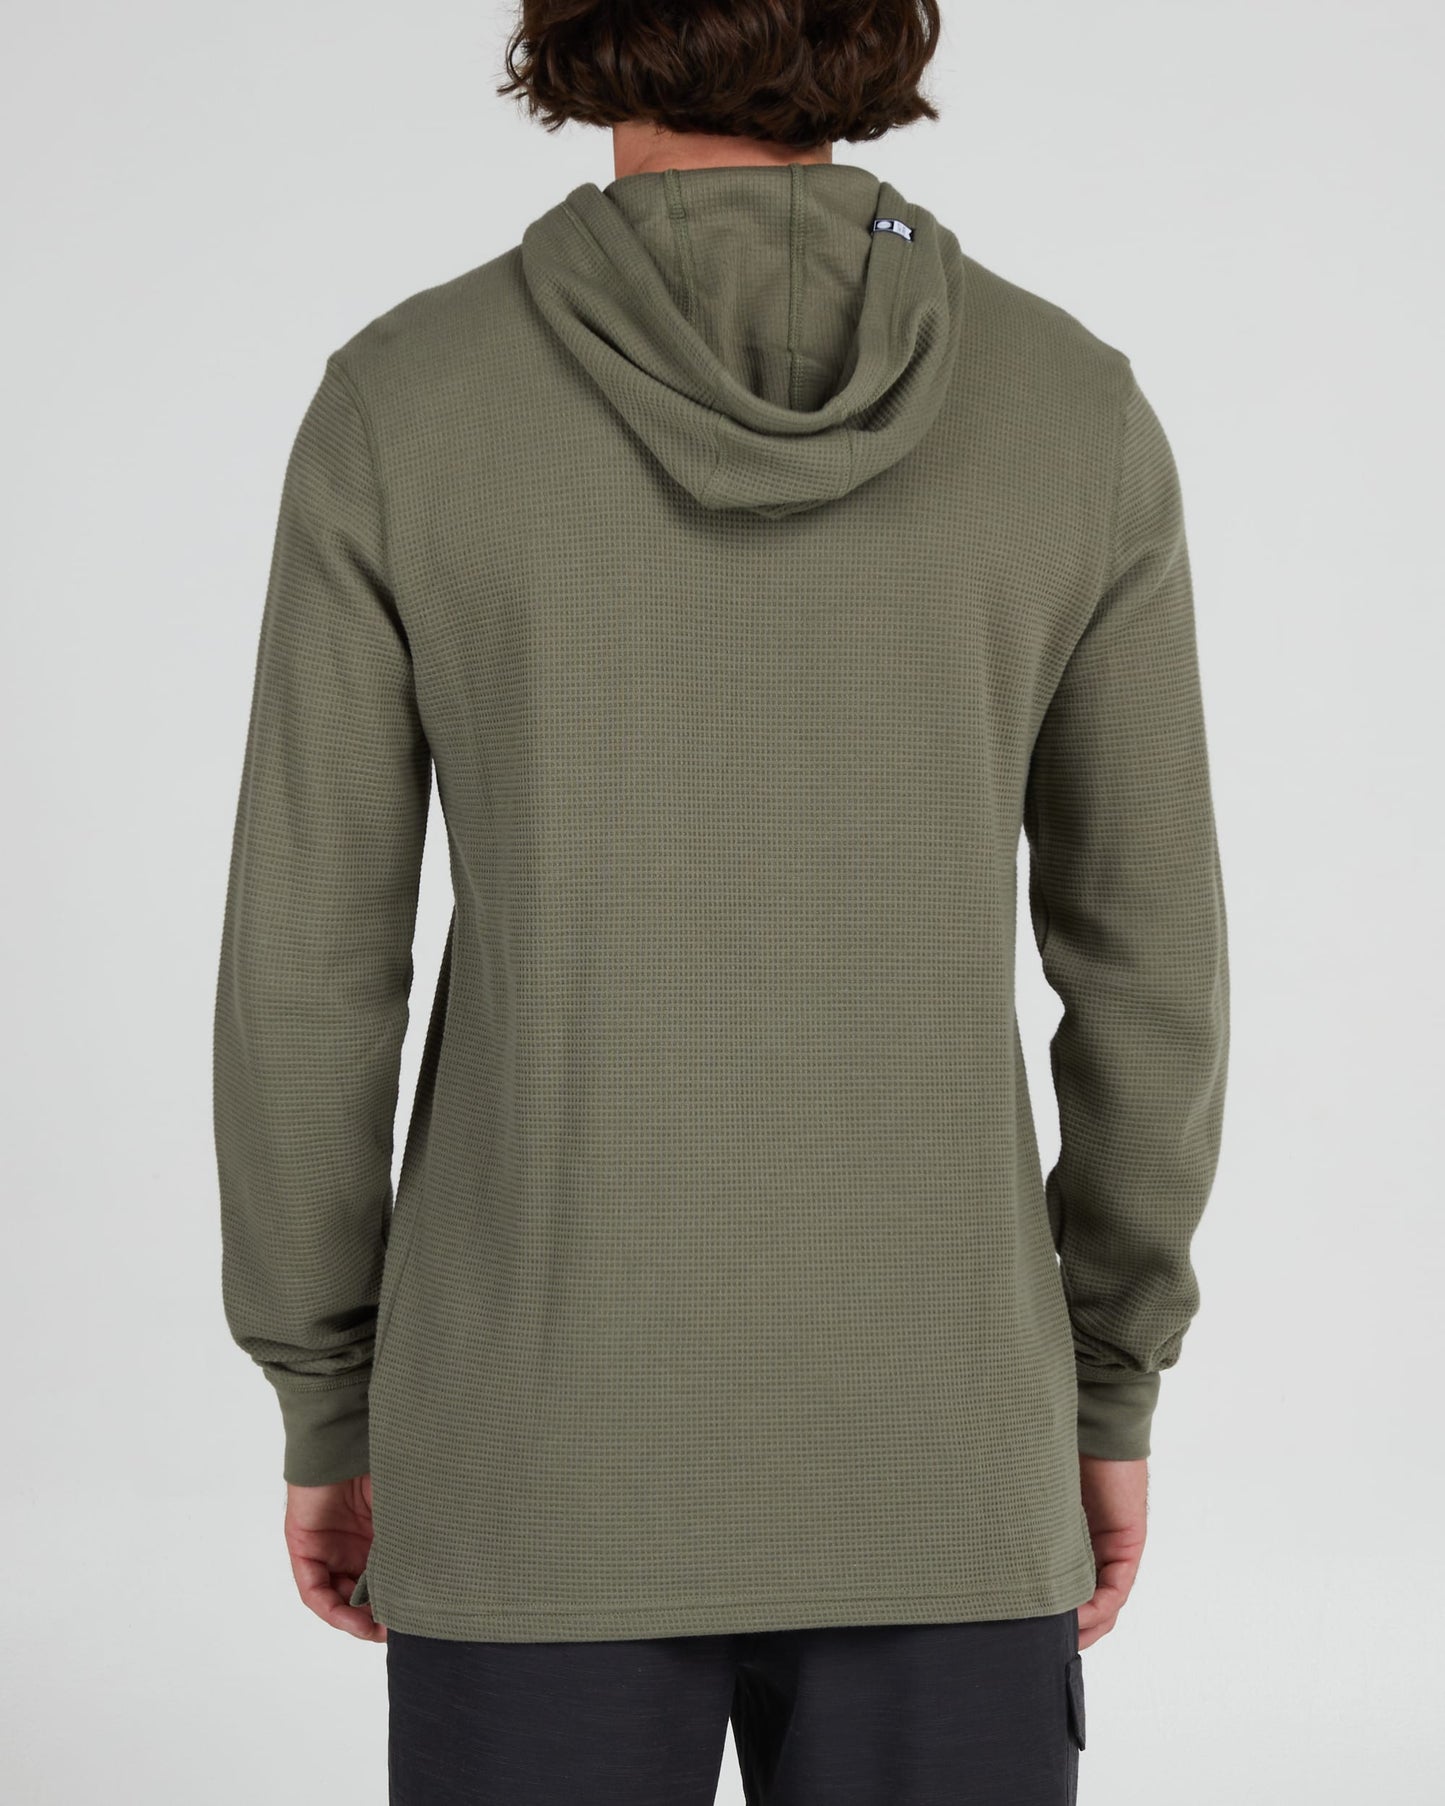 Salty crew KNIT TOPS DAYBREAK 2 HOODED THERMAL - Olive in Olive